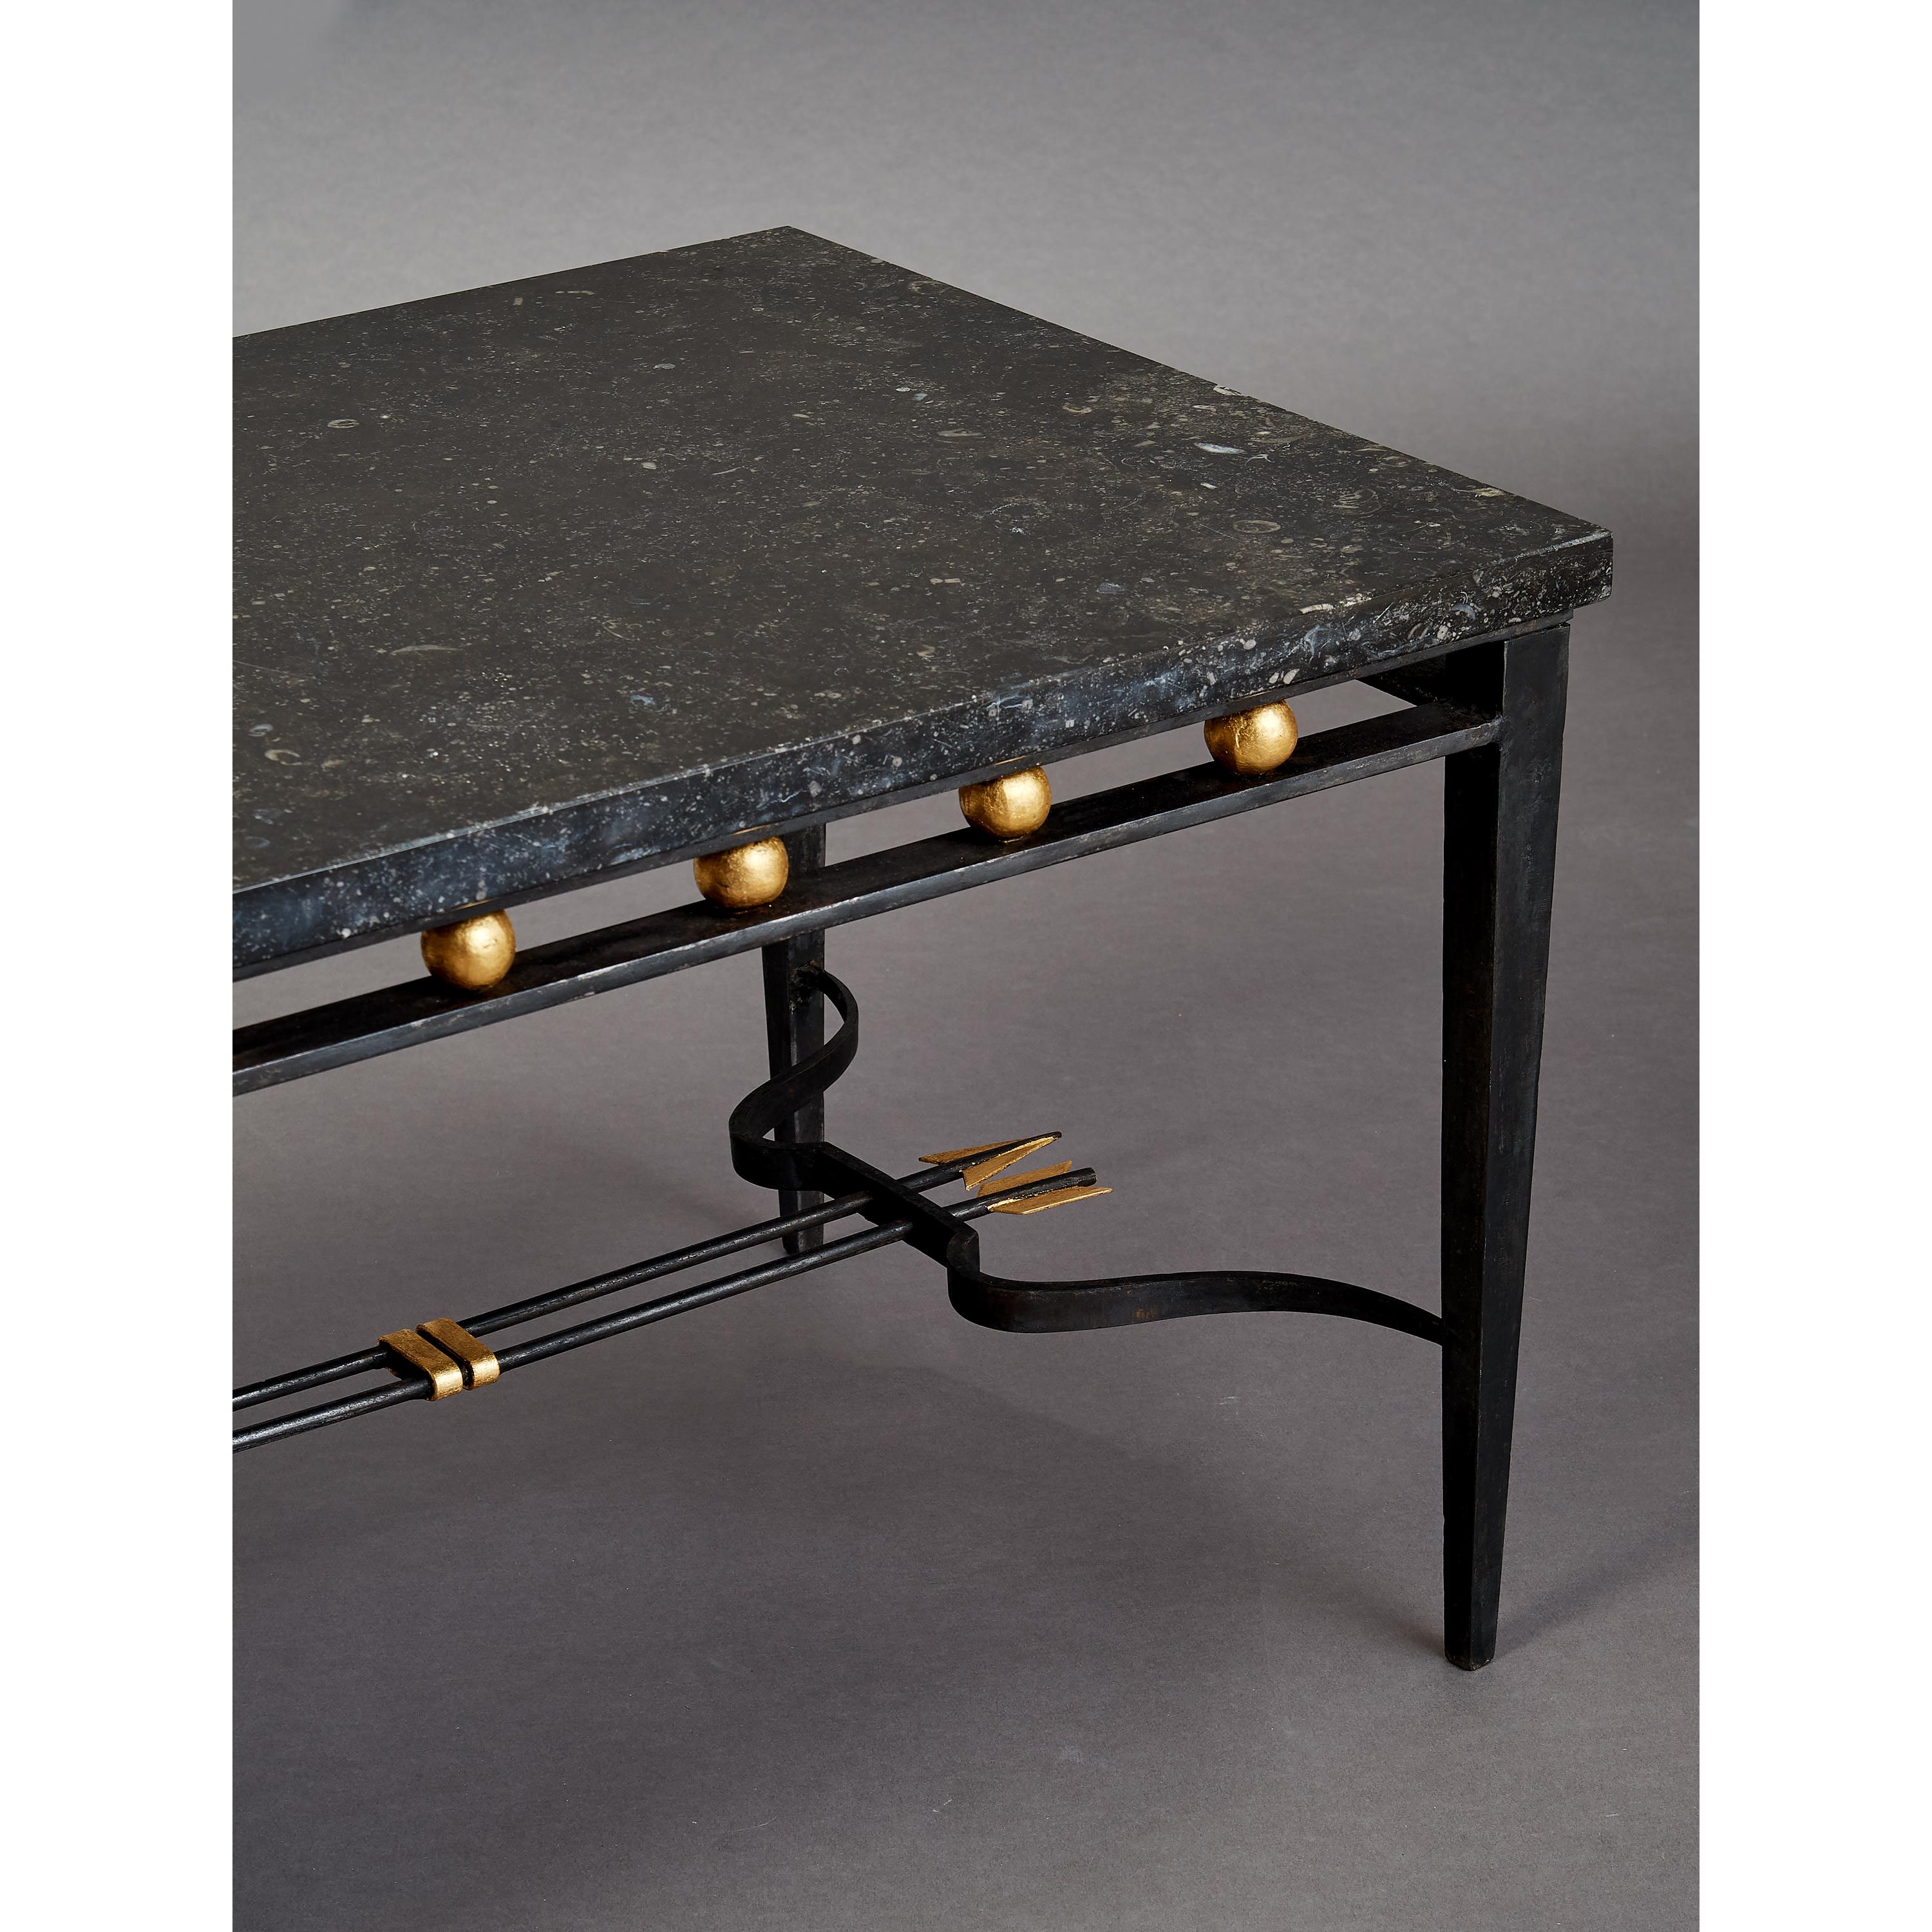 Mid-20th Century Imposing Wrought Iron Table with Gilt Decor and Marble Top, France, 1950's